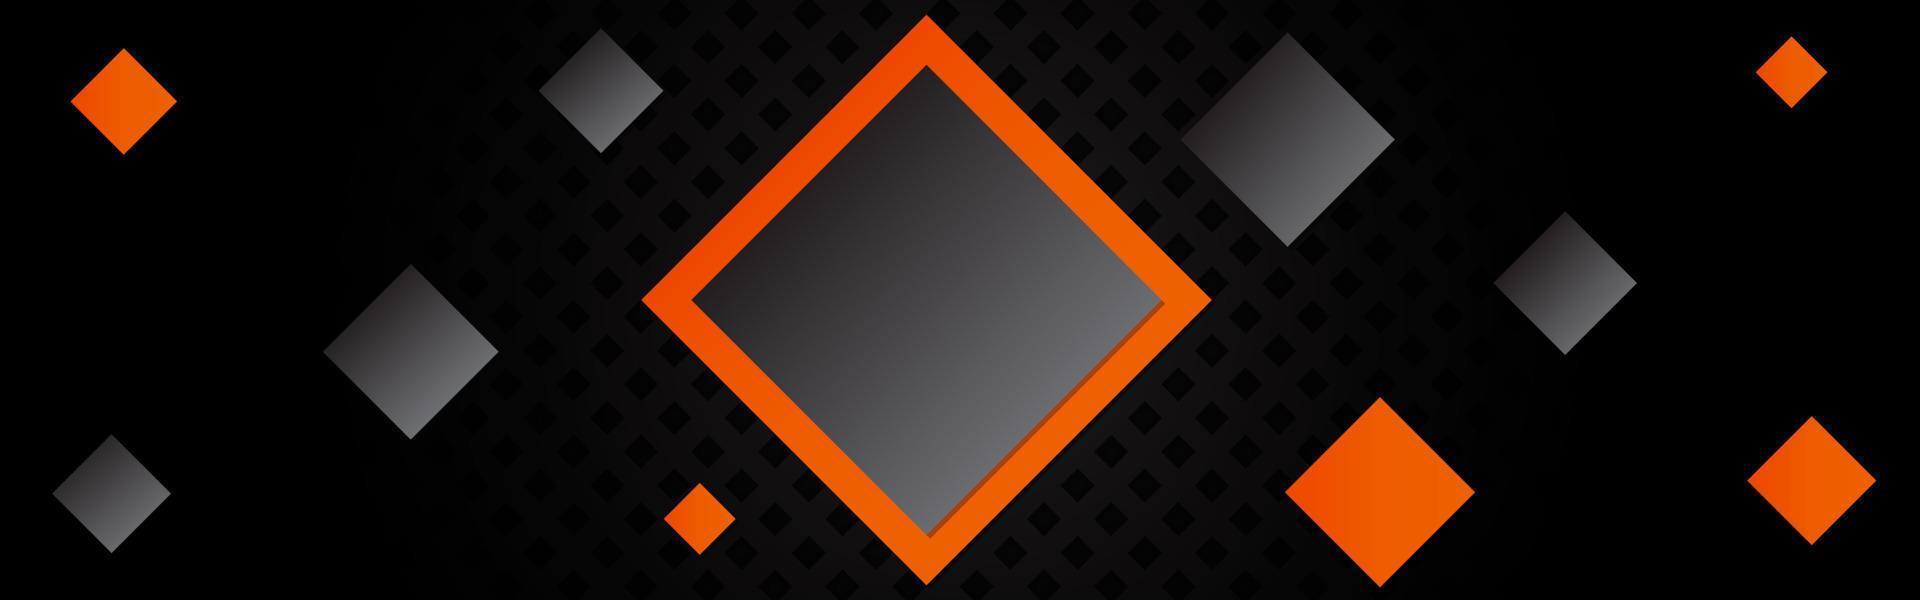 Fashionable composition of orange and black rhombuses on a black background. Dark metal perforated texture. Technology geometric illustration. Header vector banner